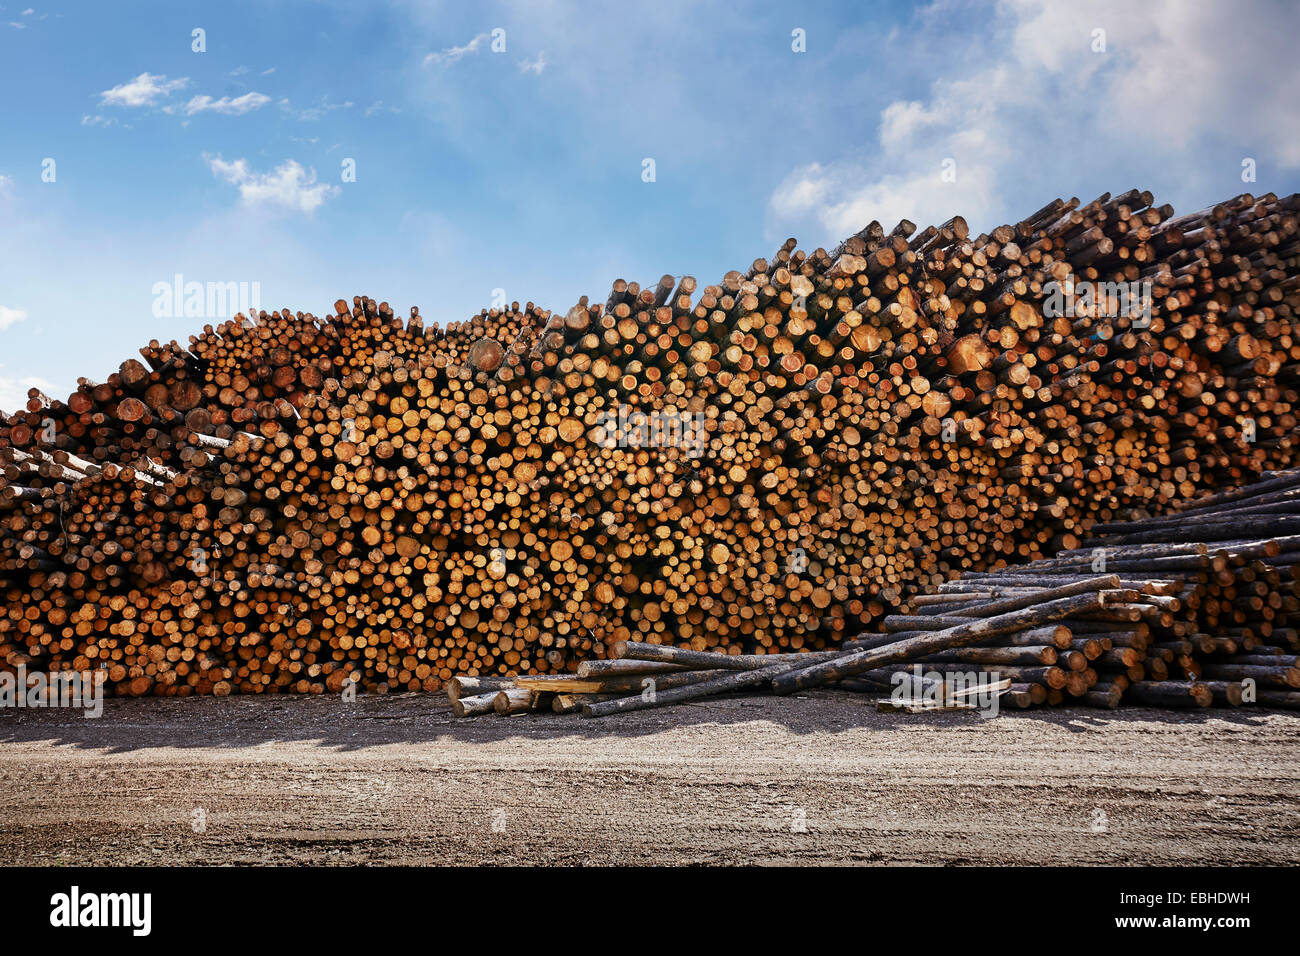 Large stack of logged timber in timber yard Stock Photo